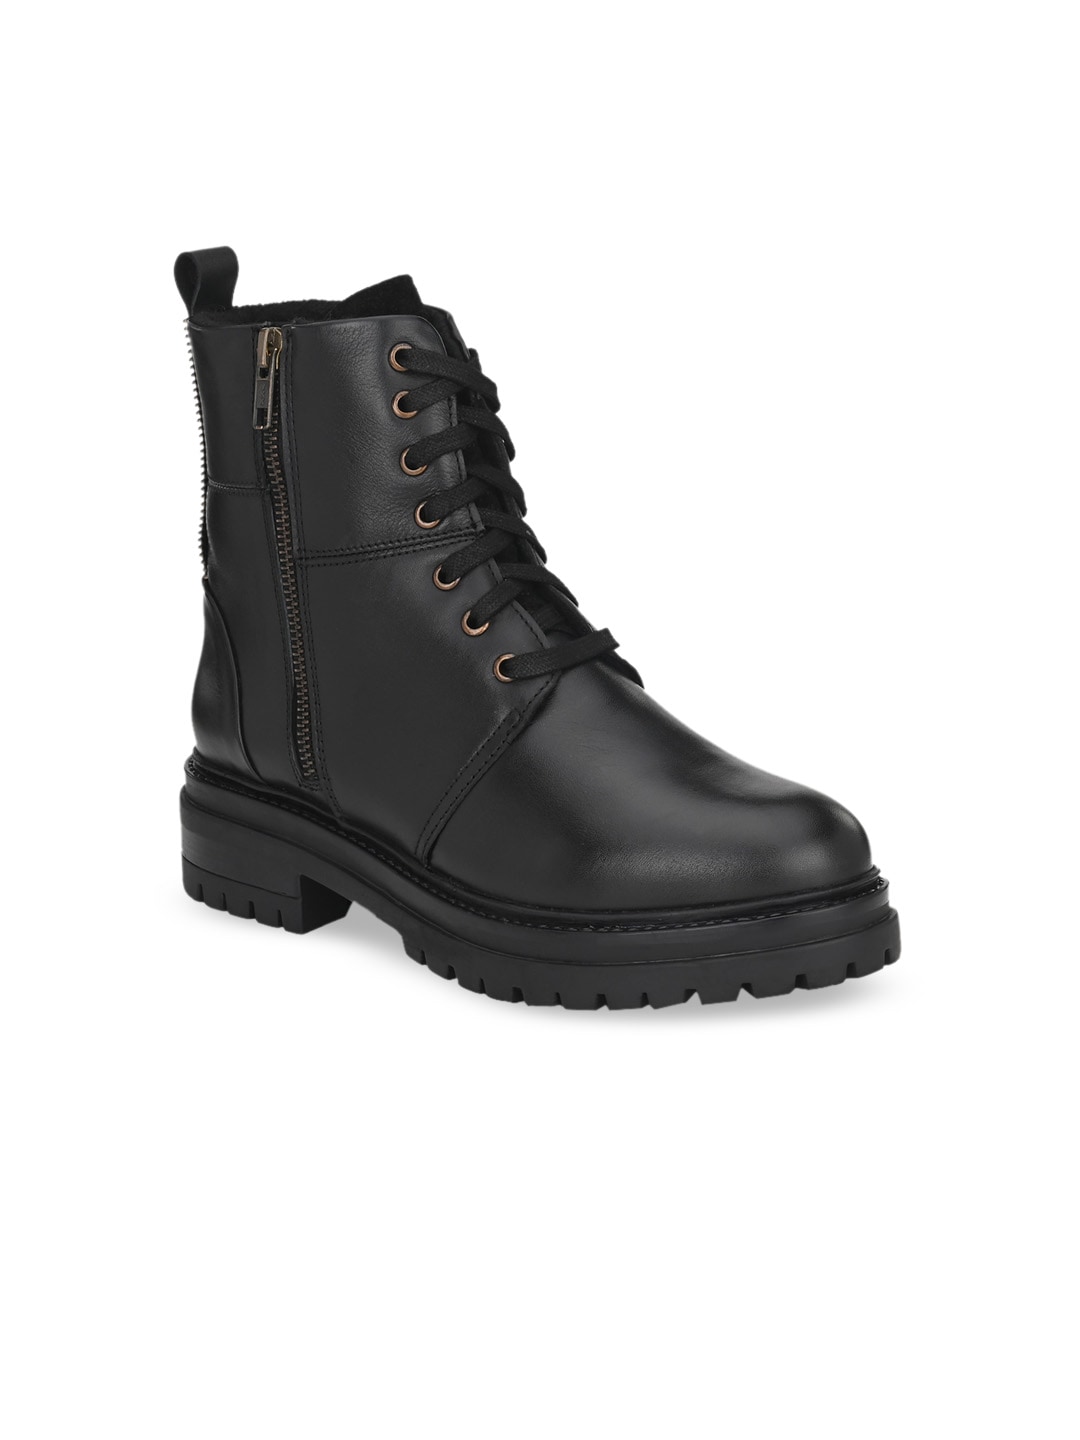 Delize Women Black Solid Leather High-Top Flat Boots Price in India